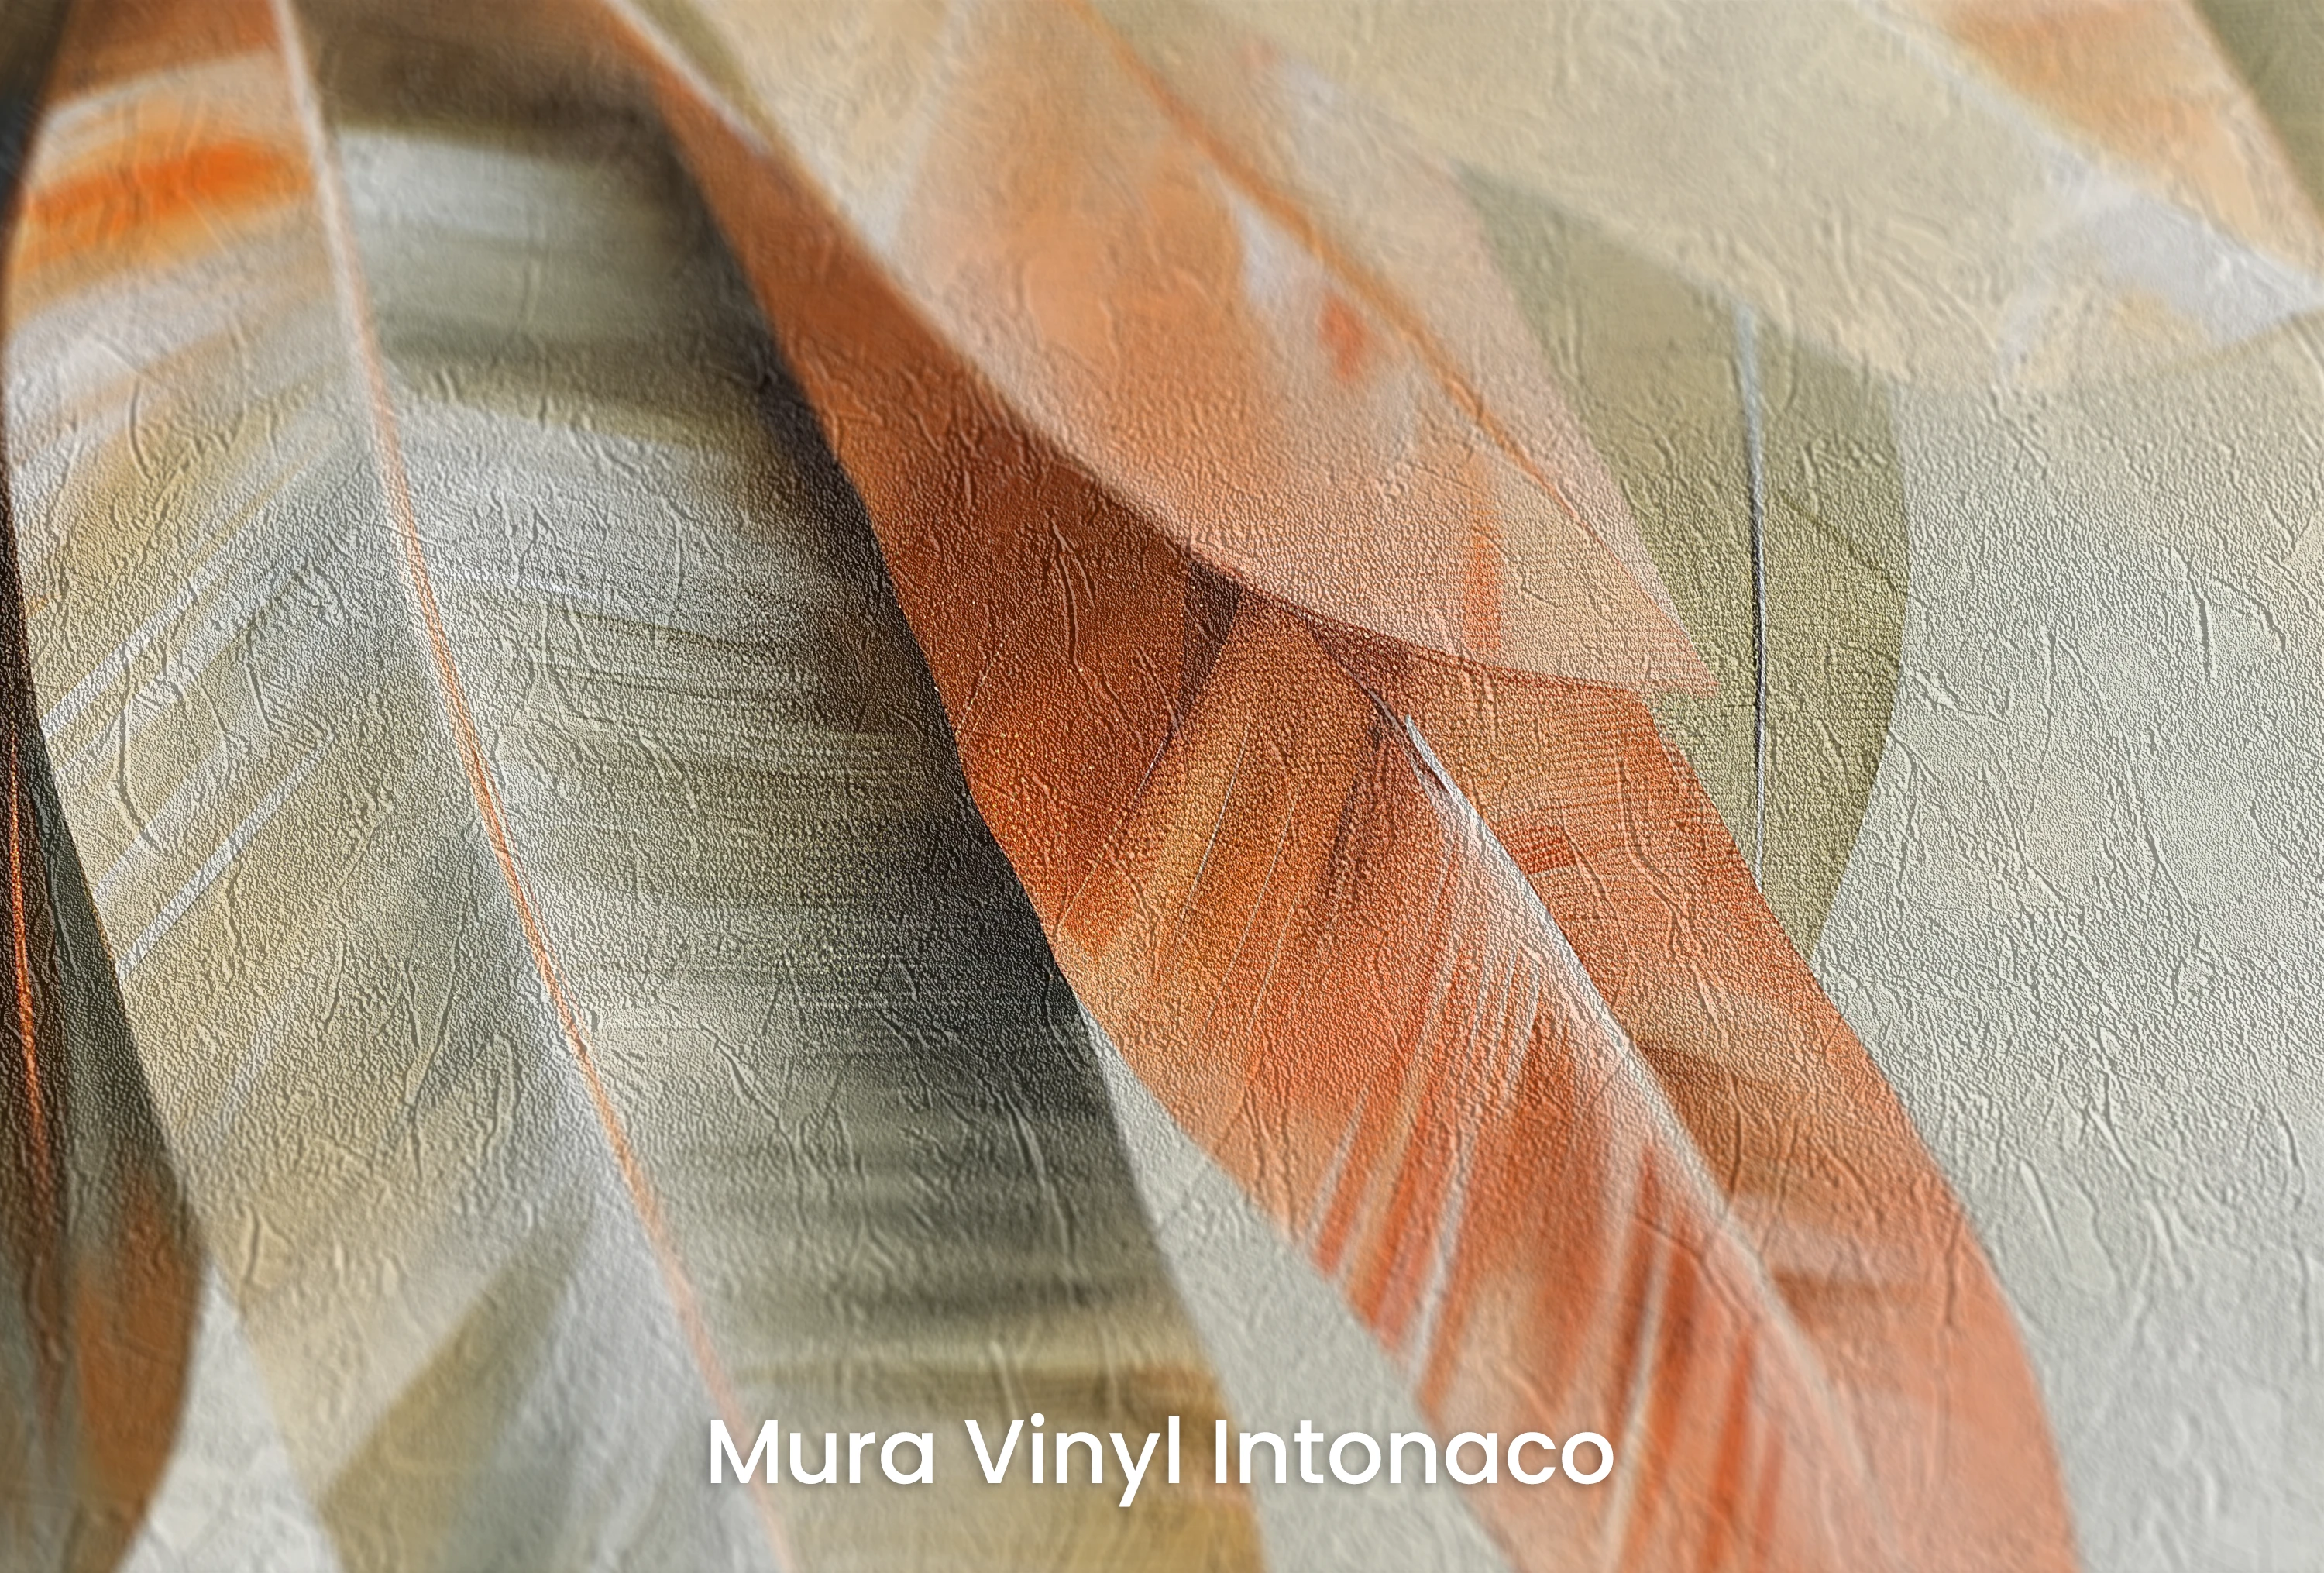 Enlargement of the "Copper Elegance" pattern printed on a substrate with the structure of grated plaster "Mura Vinyl Intonaco"